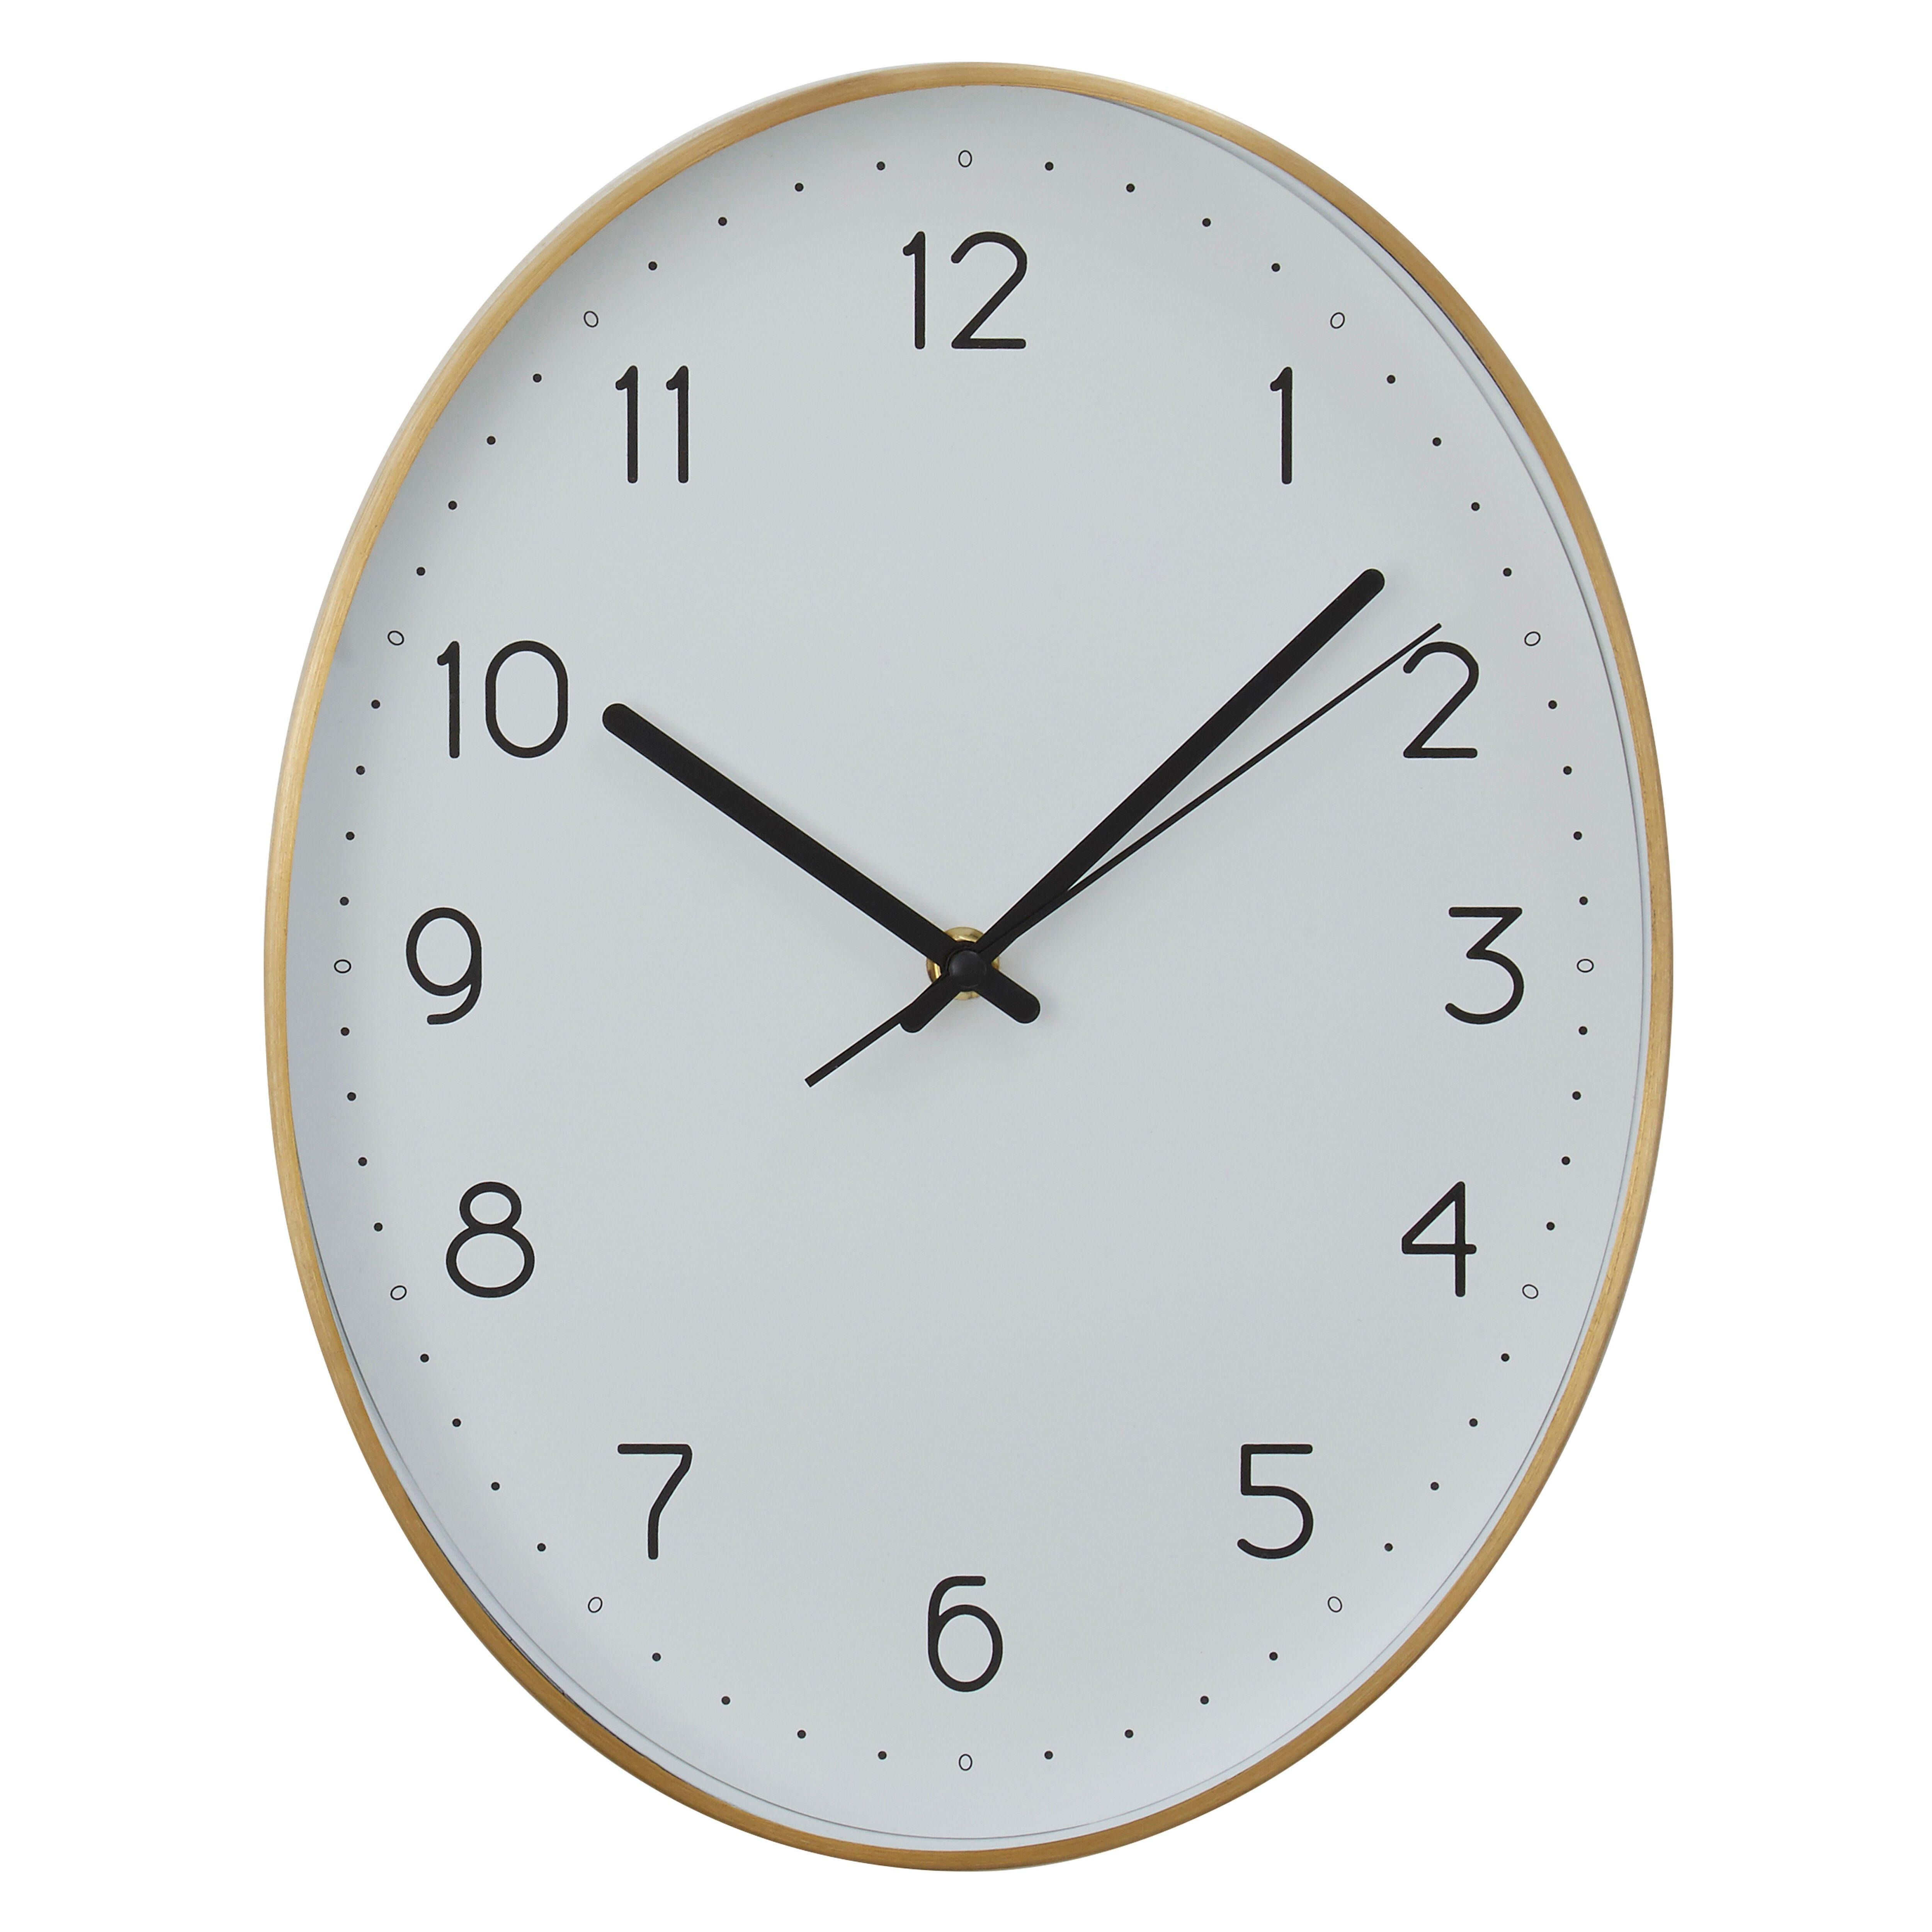 Interiors by Premier Elko Oval Wall Clock - image 1